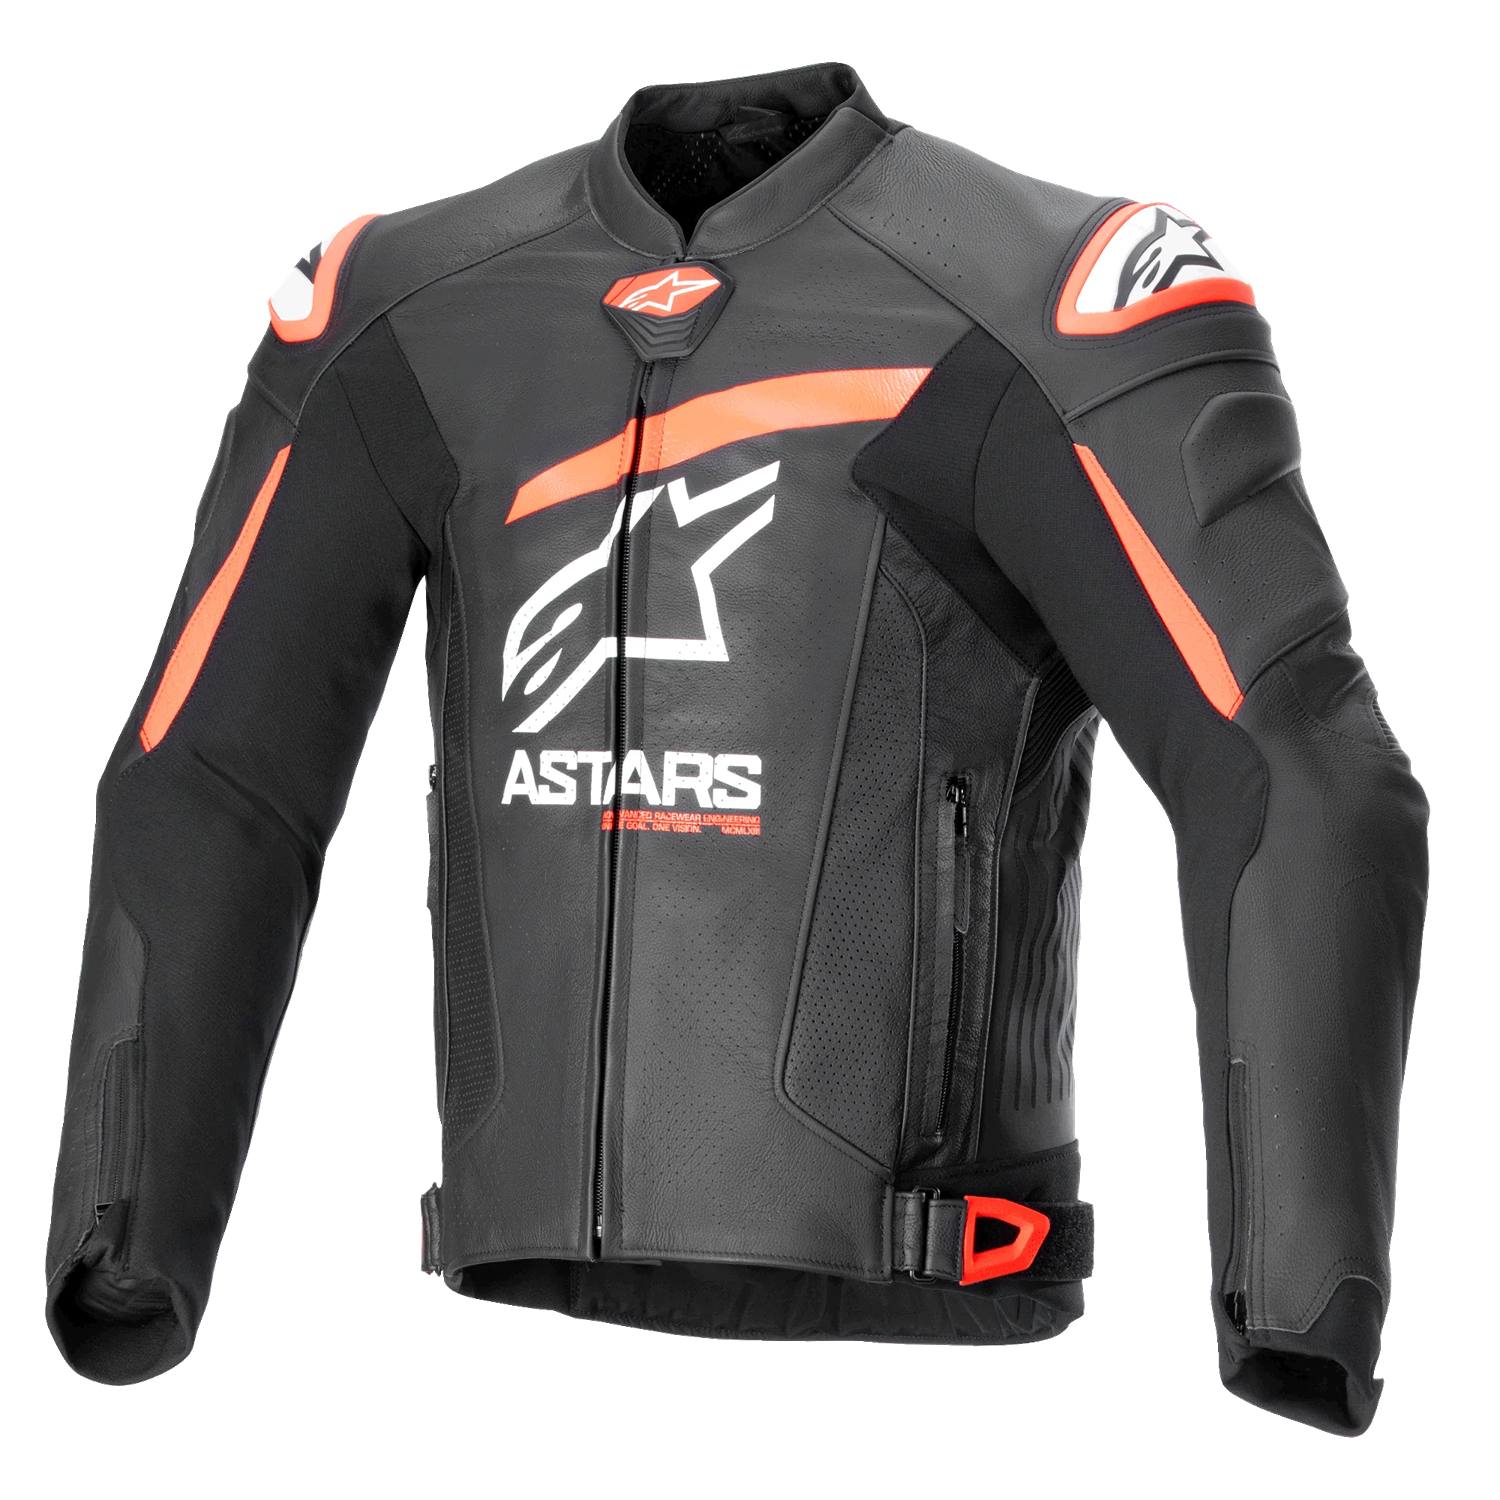 Image of Alpinestars Gp Plus R V4 Airflow Leather Jacket Black Red Fluo White Size 50 ID 8059347339573